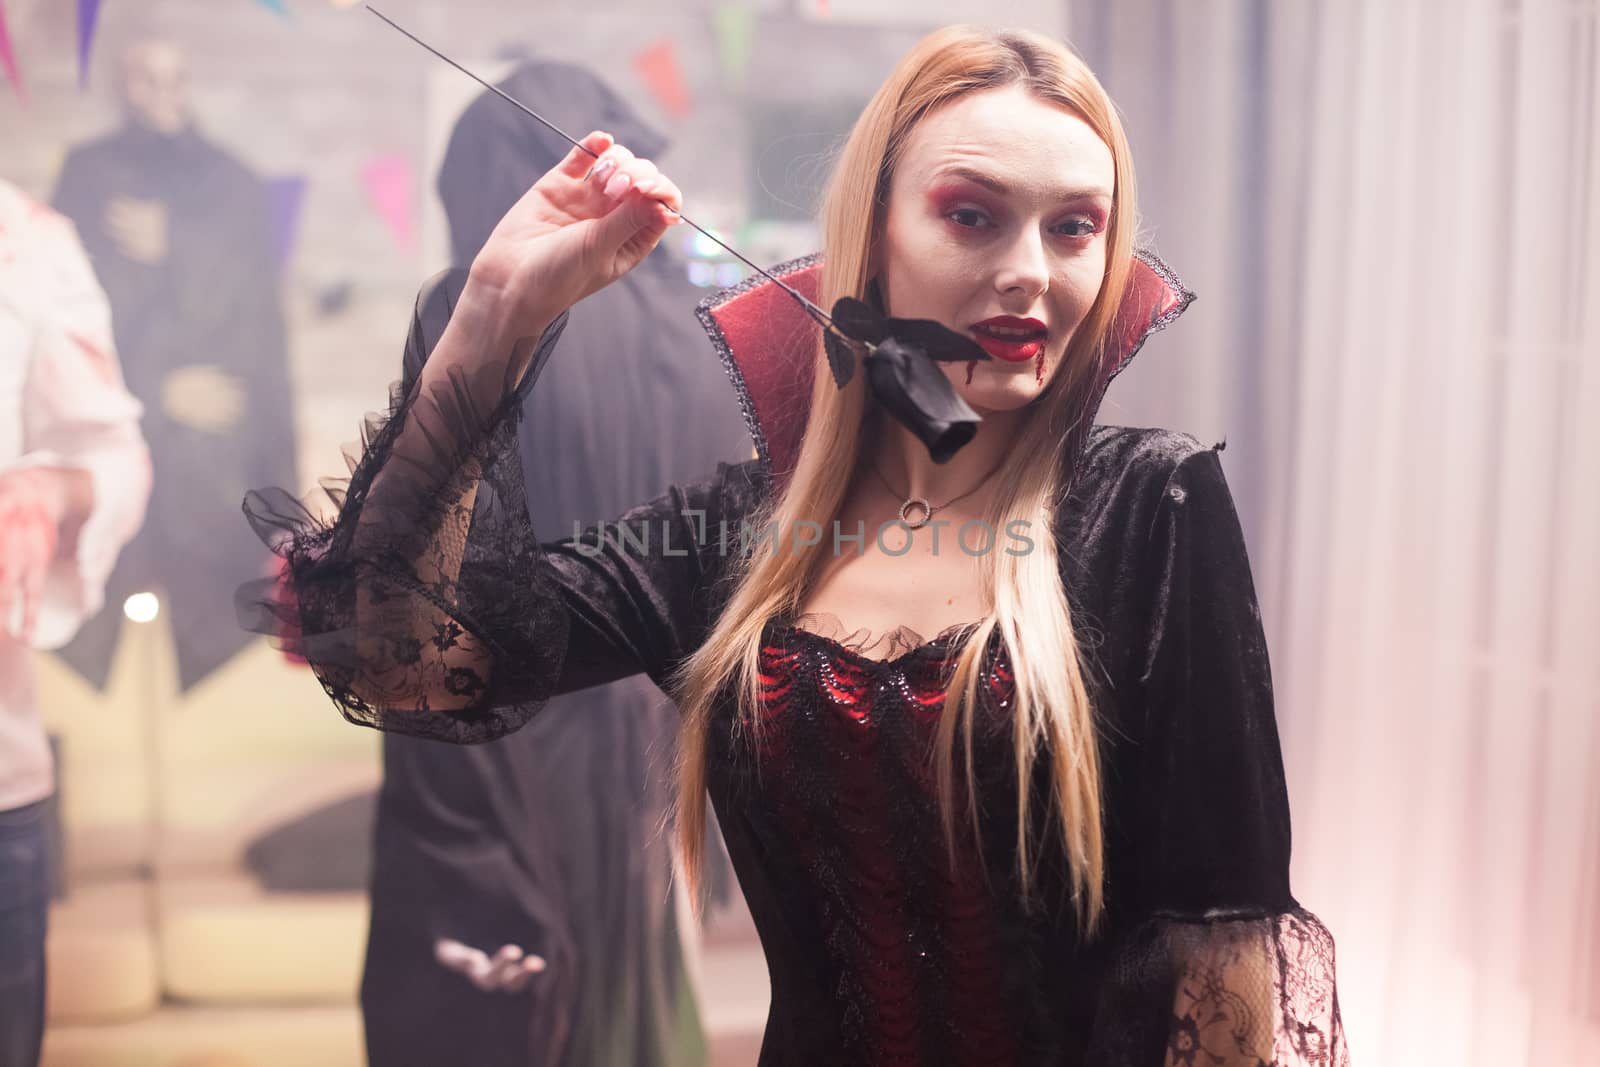 Young woman dressed up like a creepy vampire with group of people celebrating halloween.